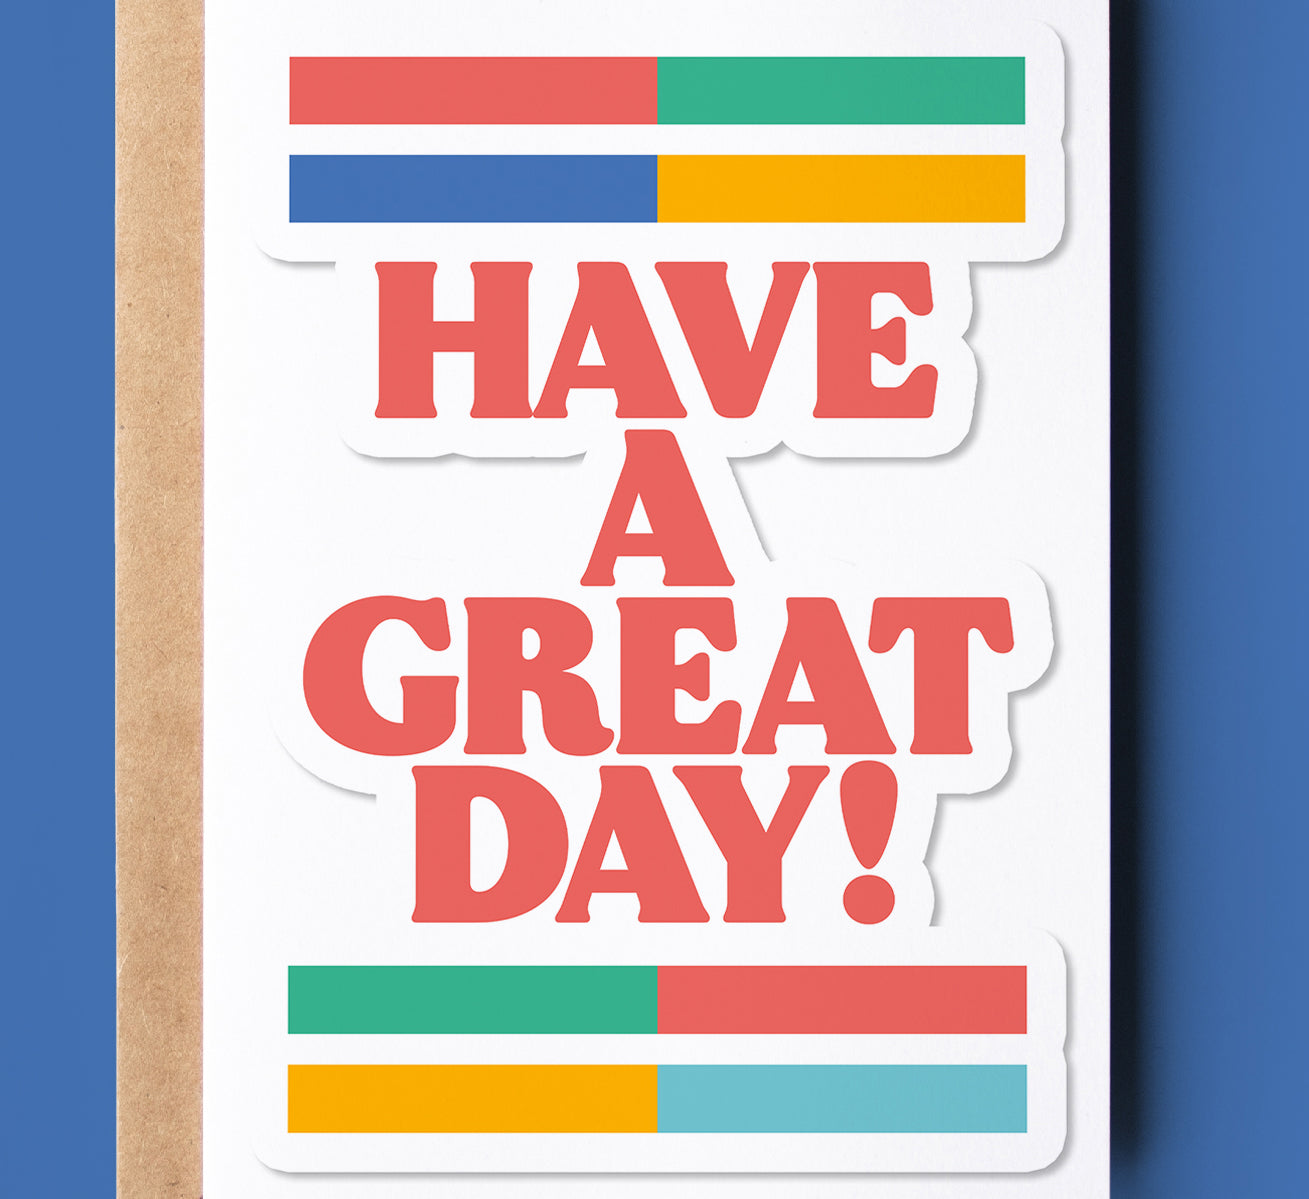 "Have a Great Day" Greeting Card